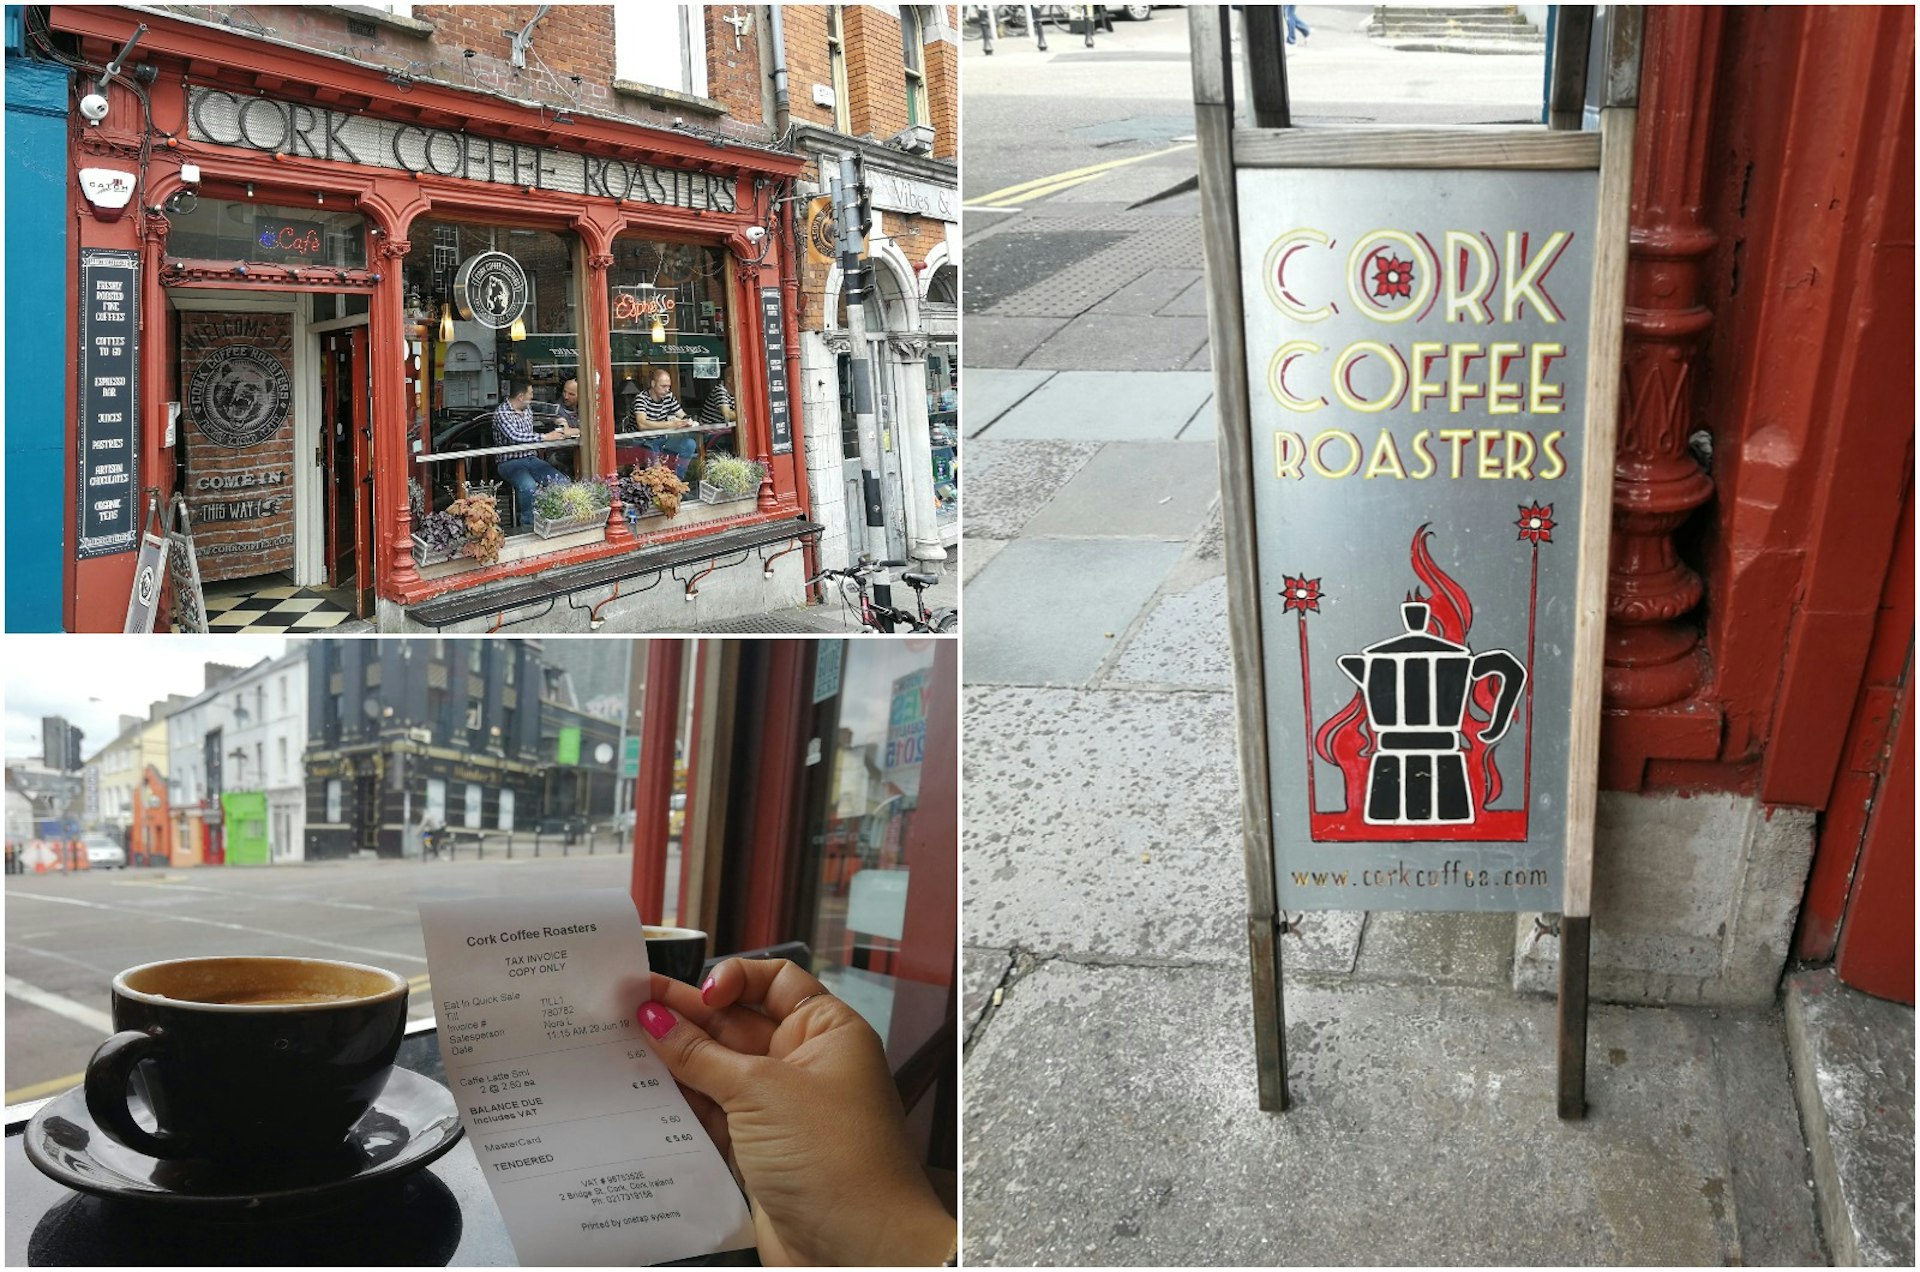 A collage of three images: top left is the red-painted exterior of Cork Coffee Roasters; bottom left is Christina's coffee with her hand holding the receipt next to it; right is a board outside the shop bearing its name and a coffee pot.